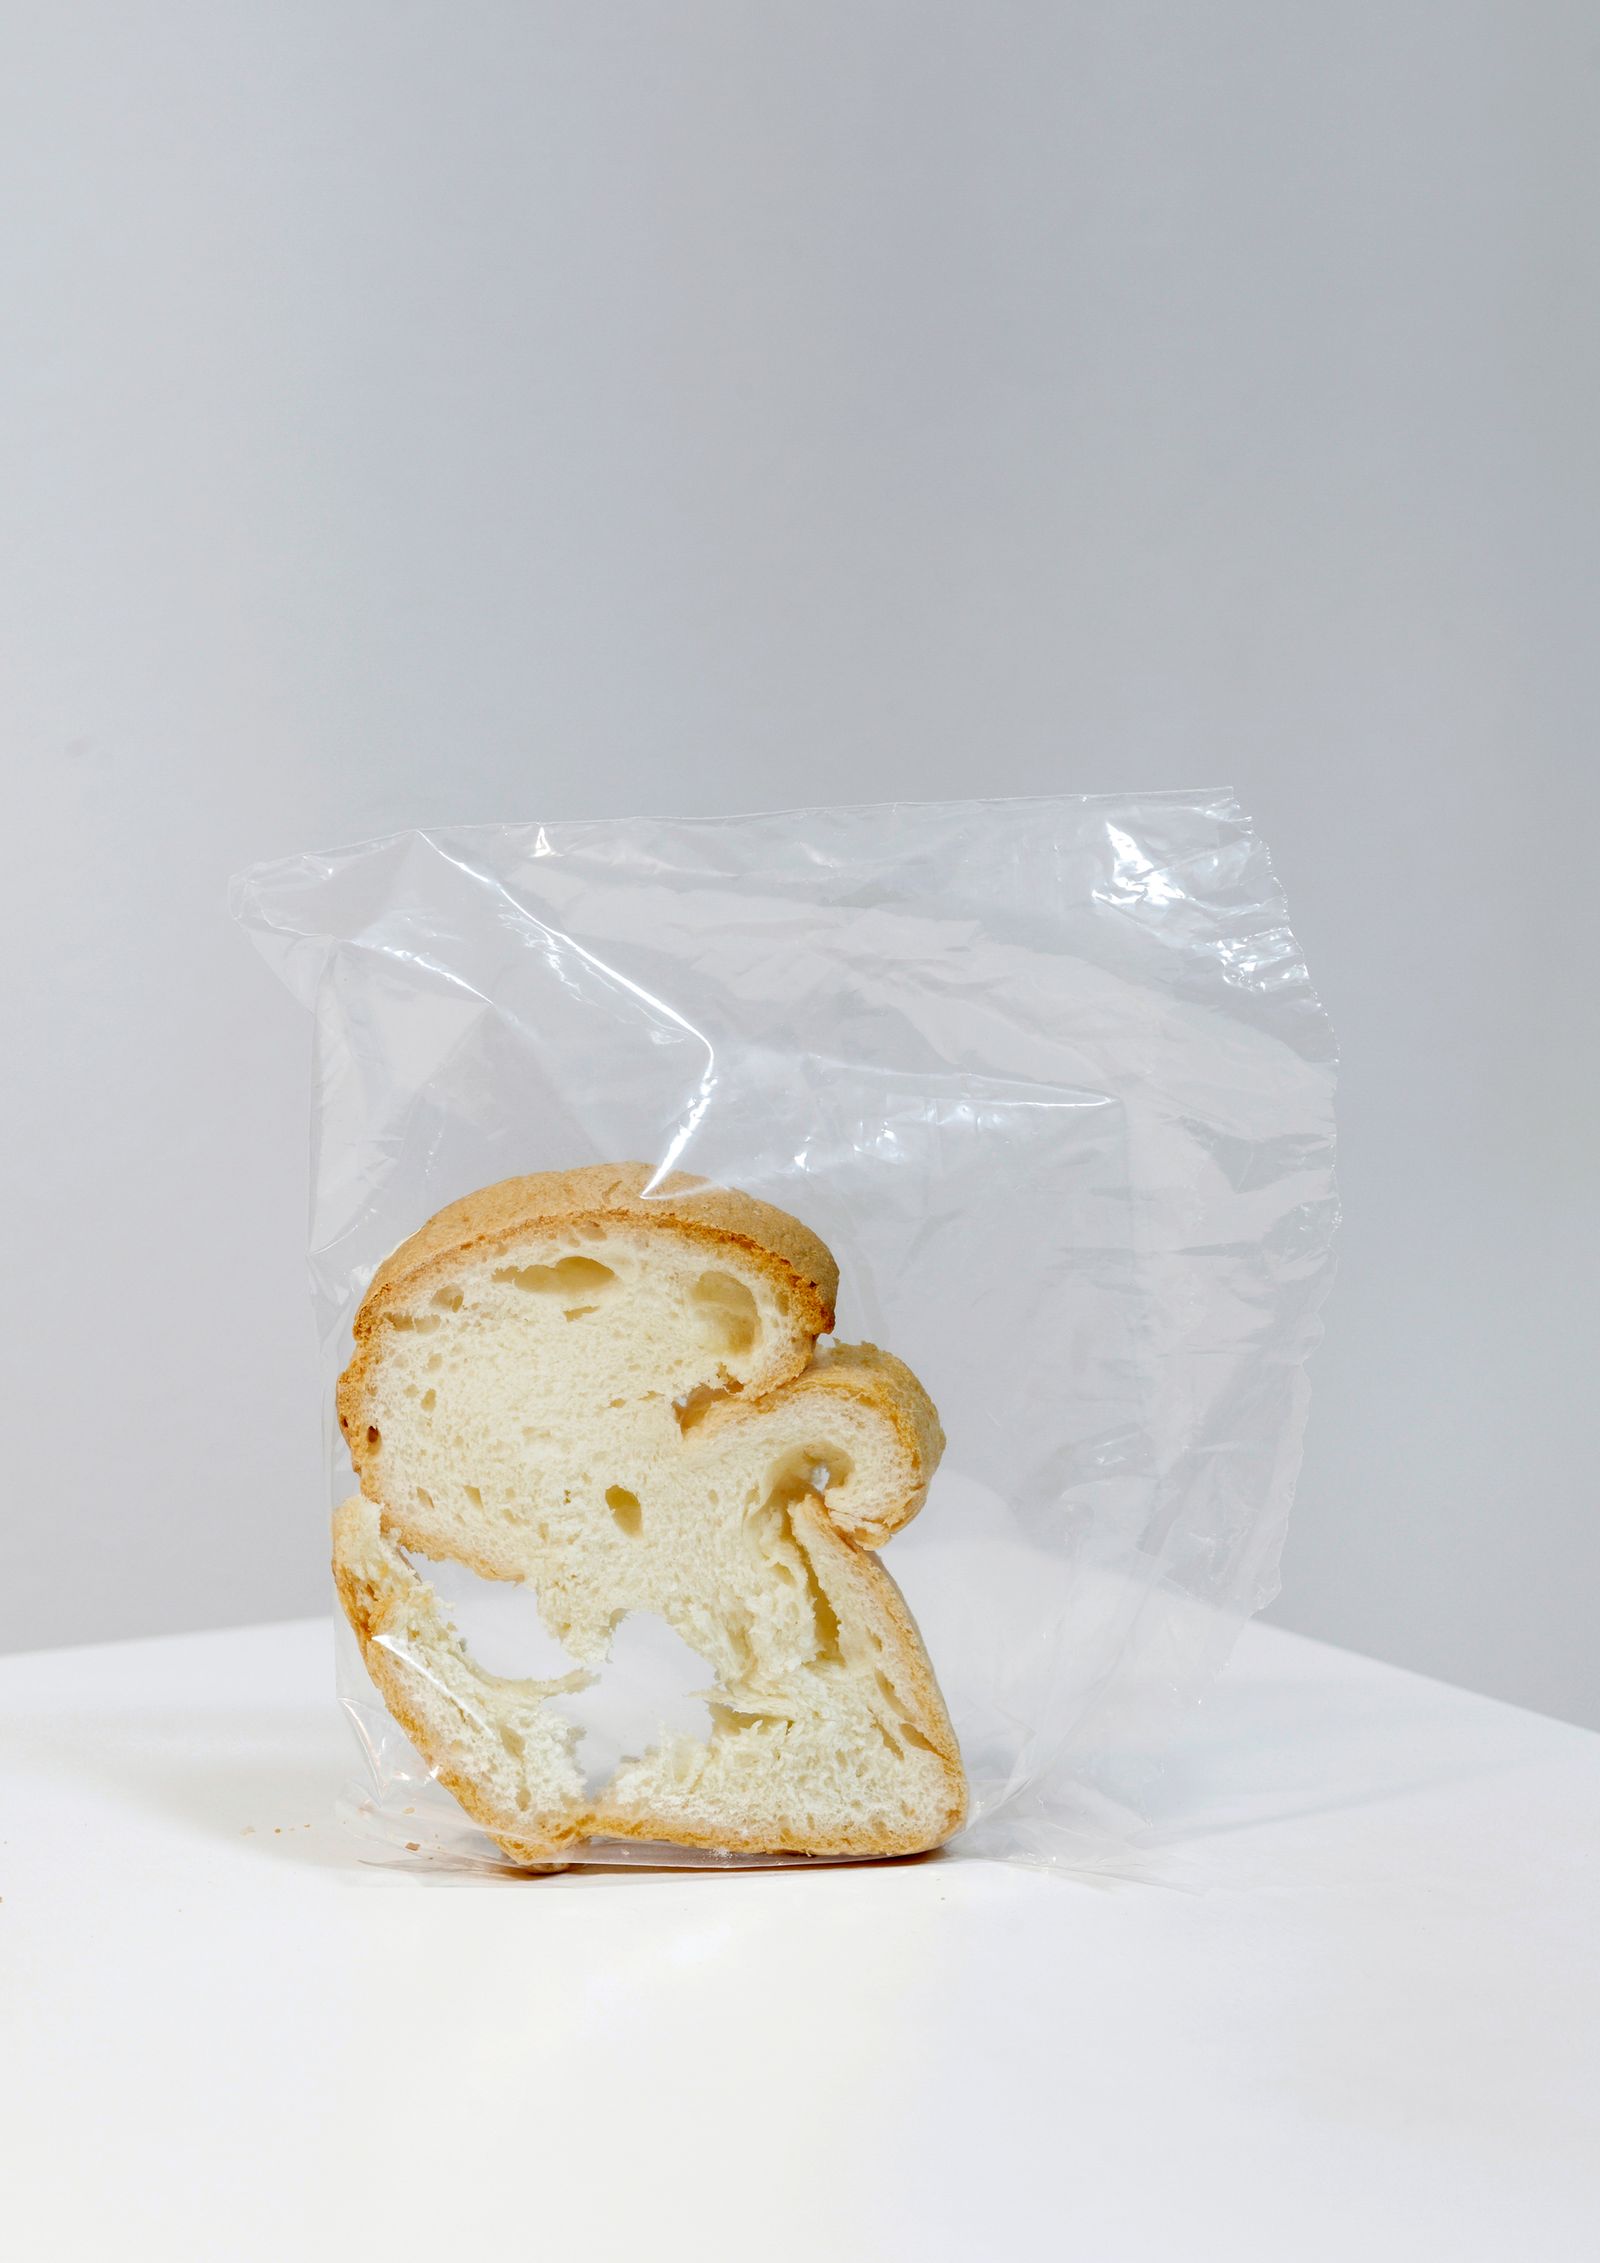 © Lucija Rosc - A piece of dry gluten-free bread that I found in our kitchen, standing upright in the plastic bag, exactly like this.